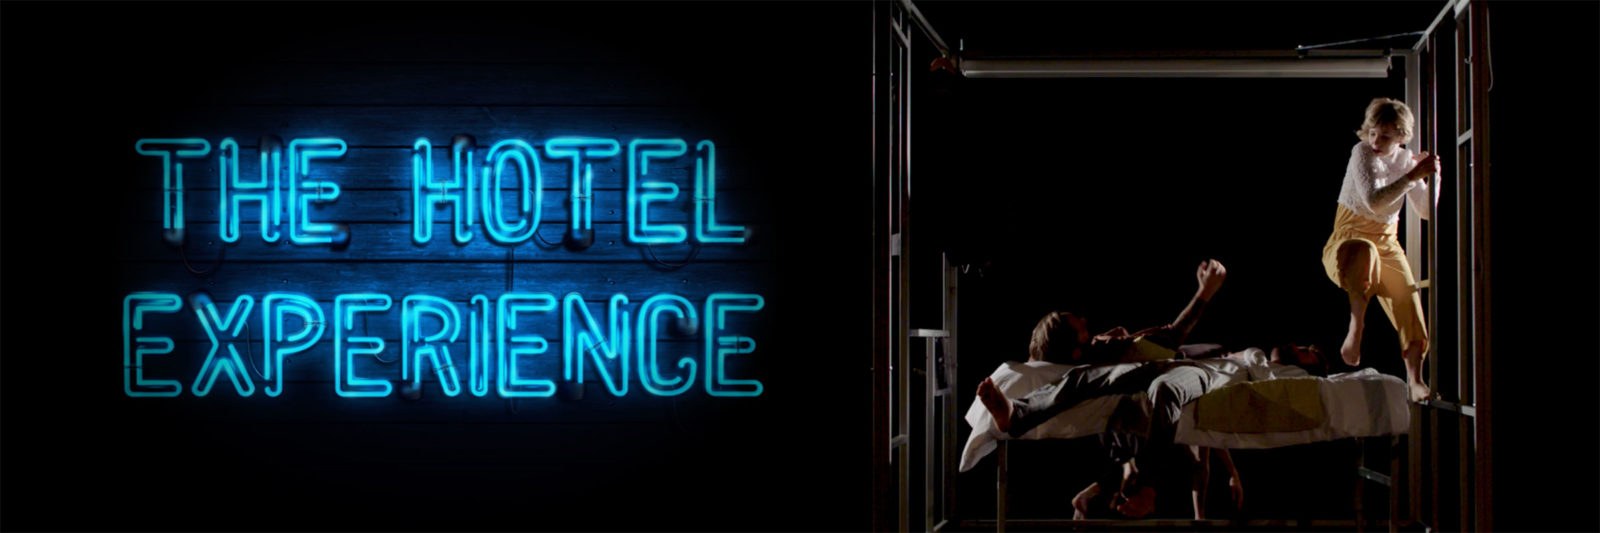 the-hotel-experience, lila dance